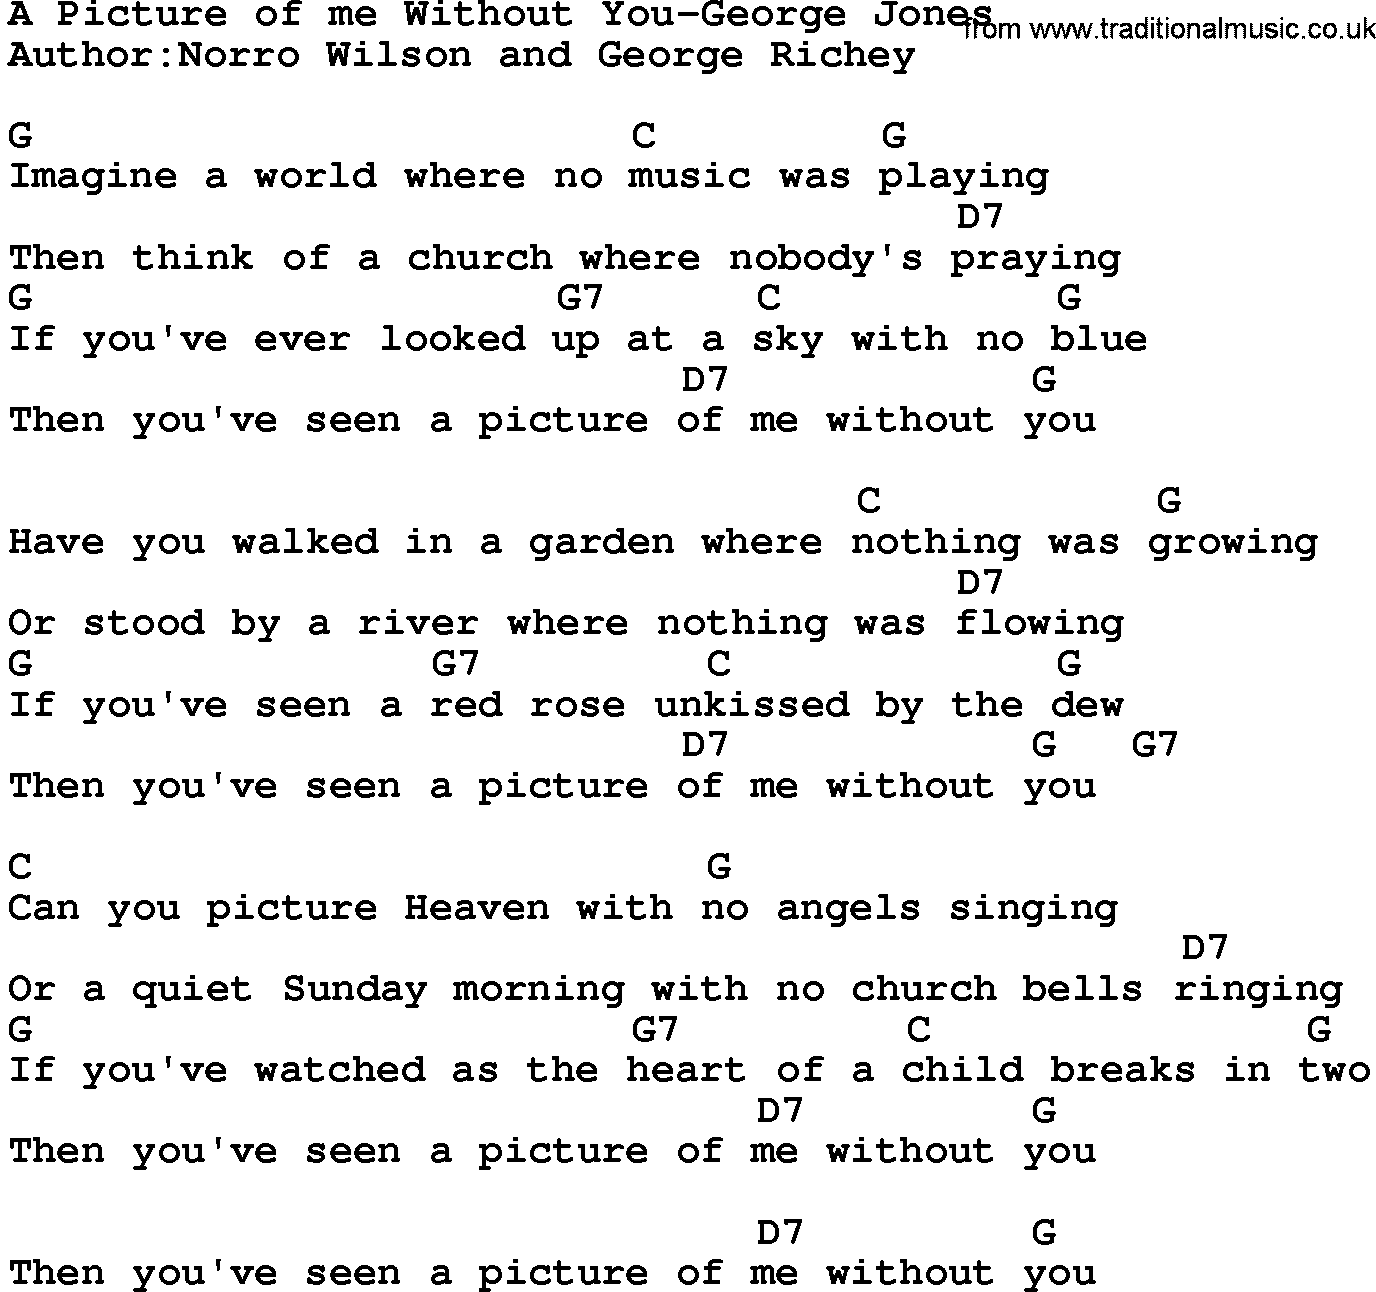 Country Music:A Picture Of Me Without You-George Jones Lyrics and Chords